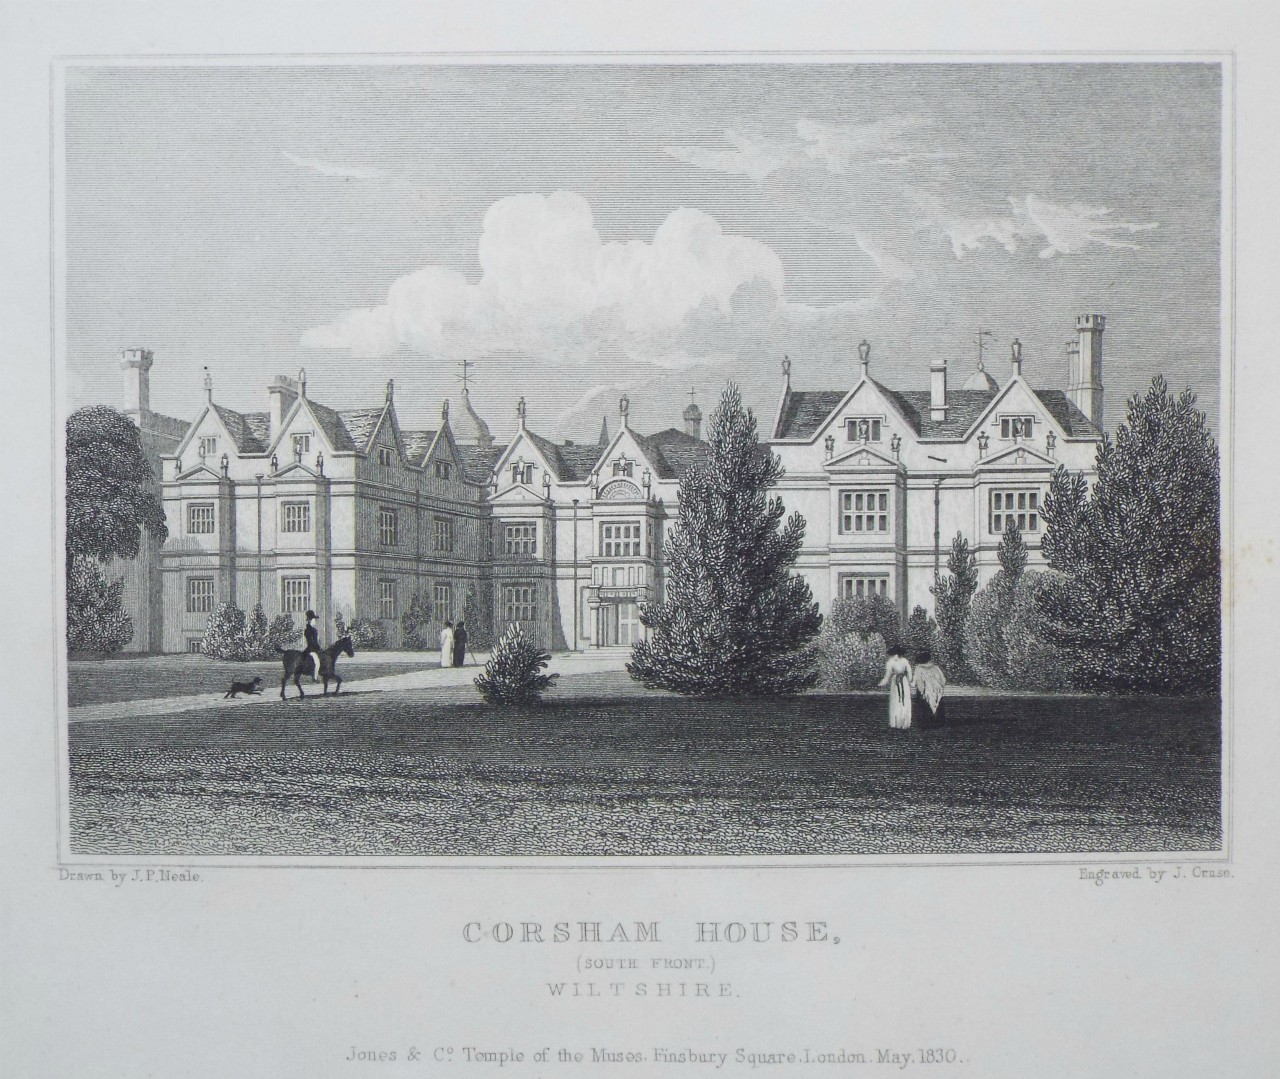 Print - Corsham House, (South Front,) Wiltshire. - Cruse